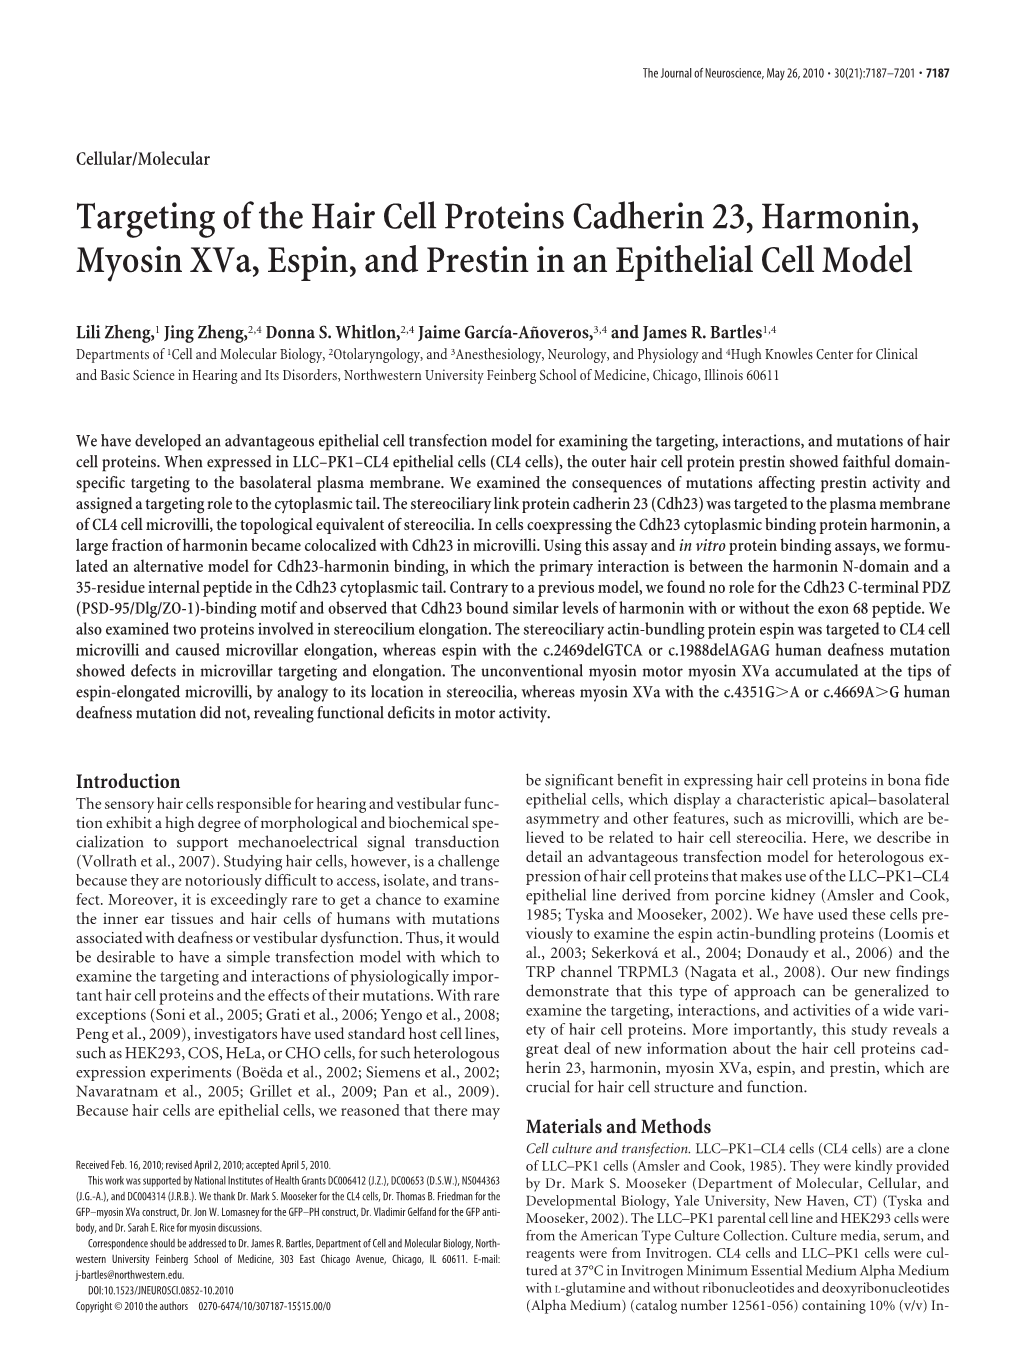 Targeting of the Hair Cell Proteins Cadherin 23, Harmonin, Myosin Xva, Espin, and Prestin in an Epithelial Cell Model